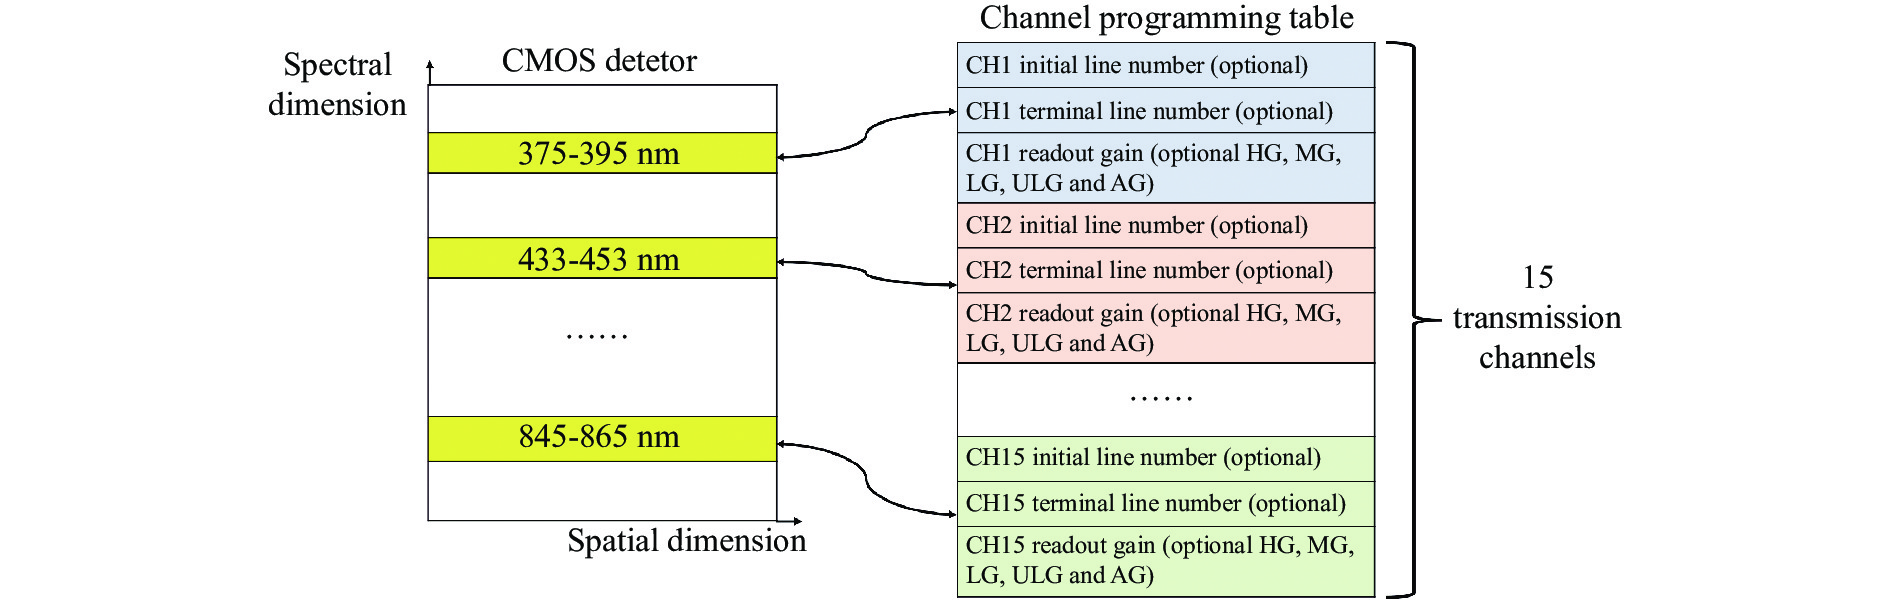 Encoding process diagram of channel programming table for adaptive gain imaging mode